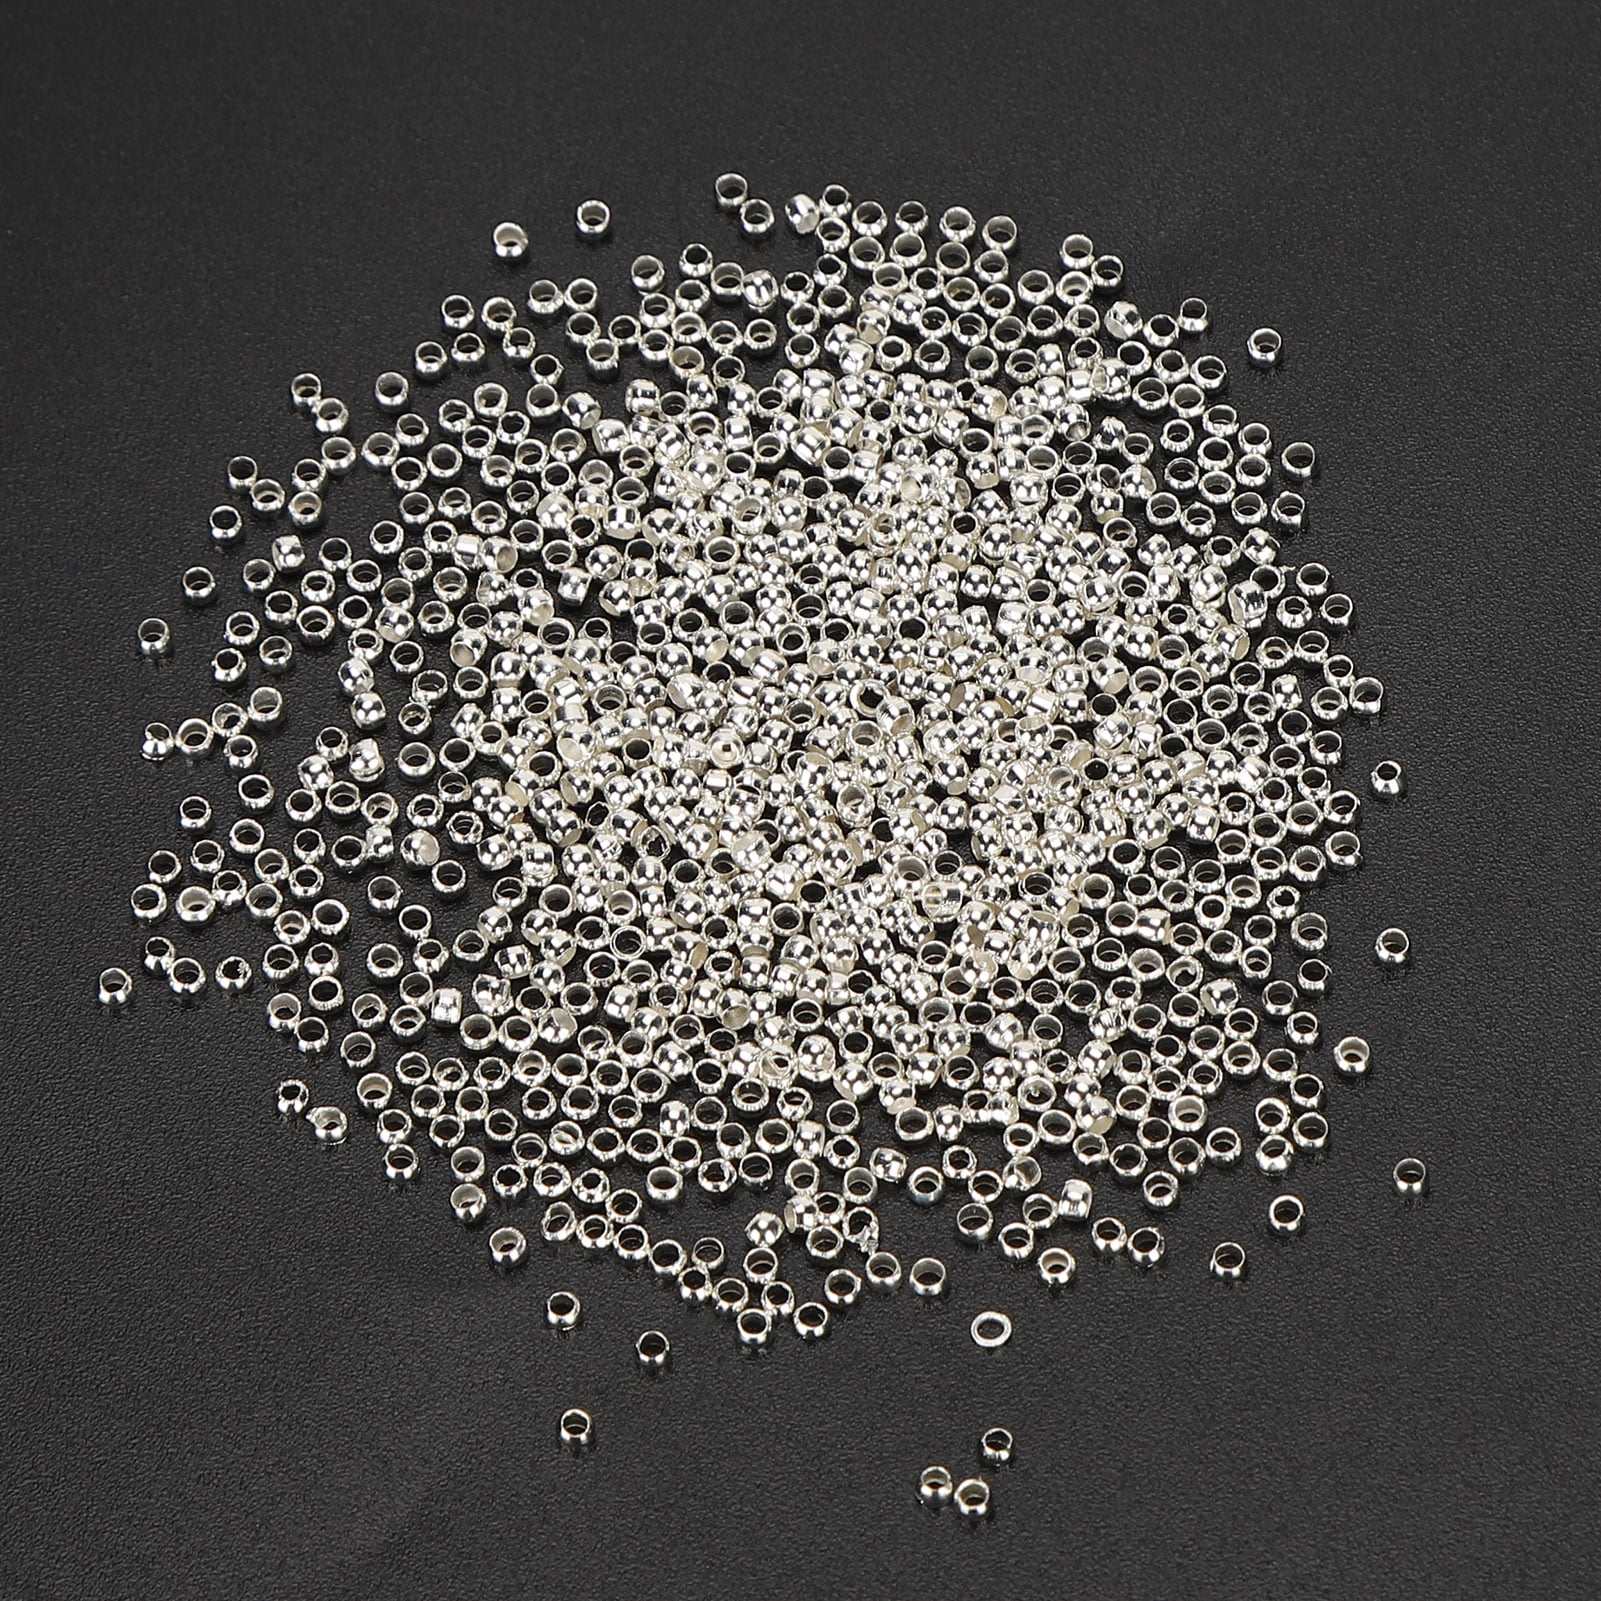 500Pcs Metal Open Bead Tips Knot Covers Round Crimp Beads for Jewelry Making  Fold Over Bead Covers for DIY Bracelets Necklaces [Platinum Plating] 